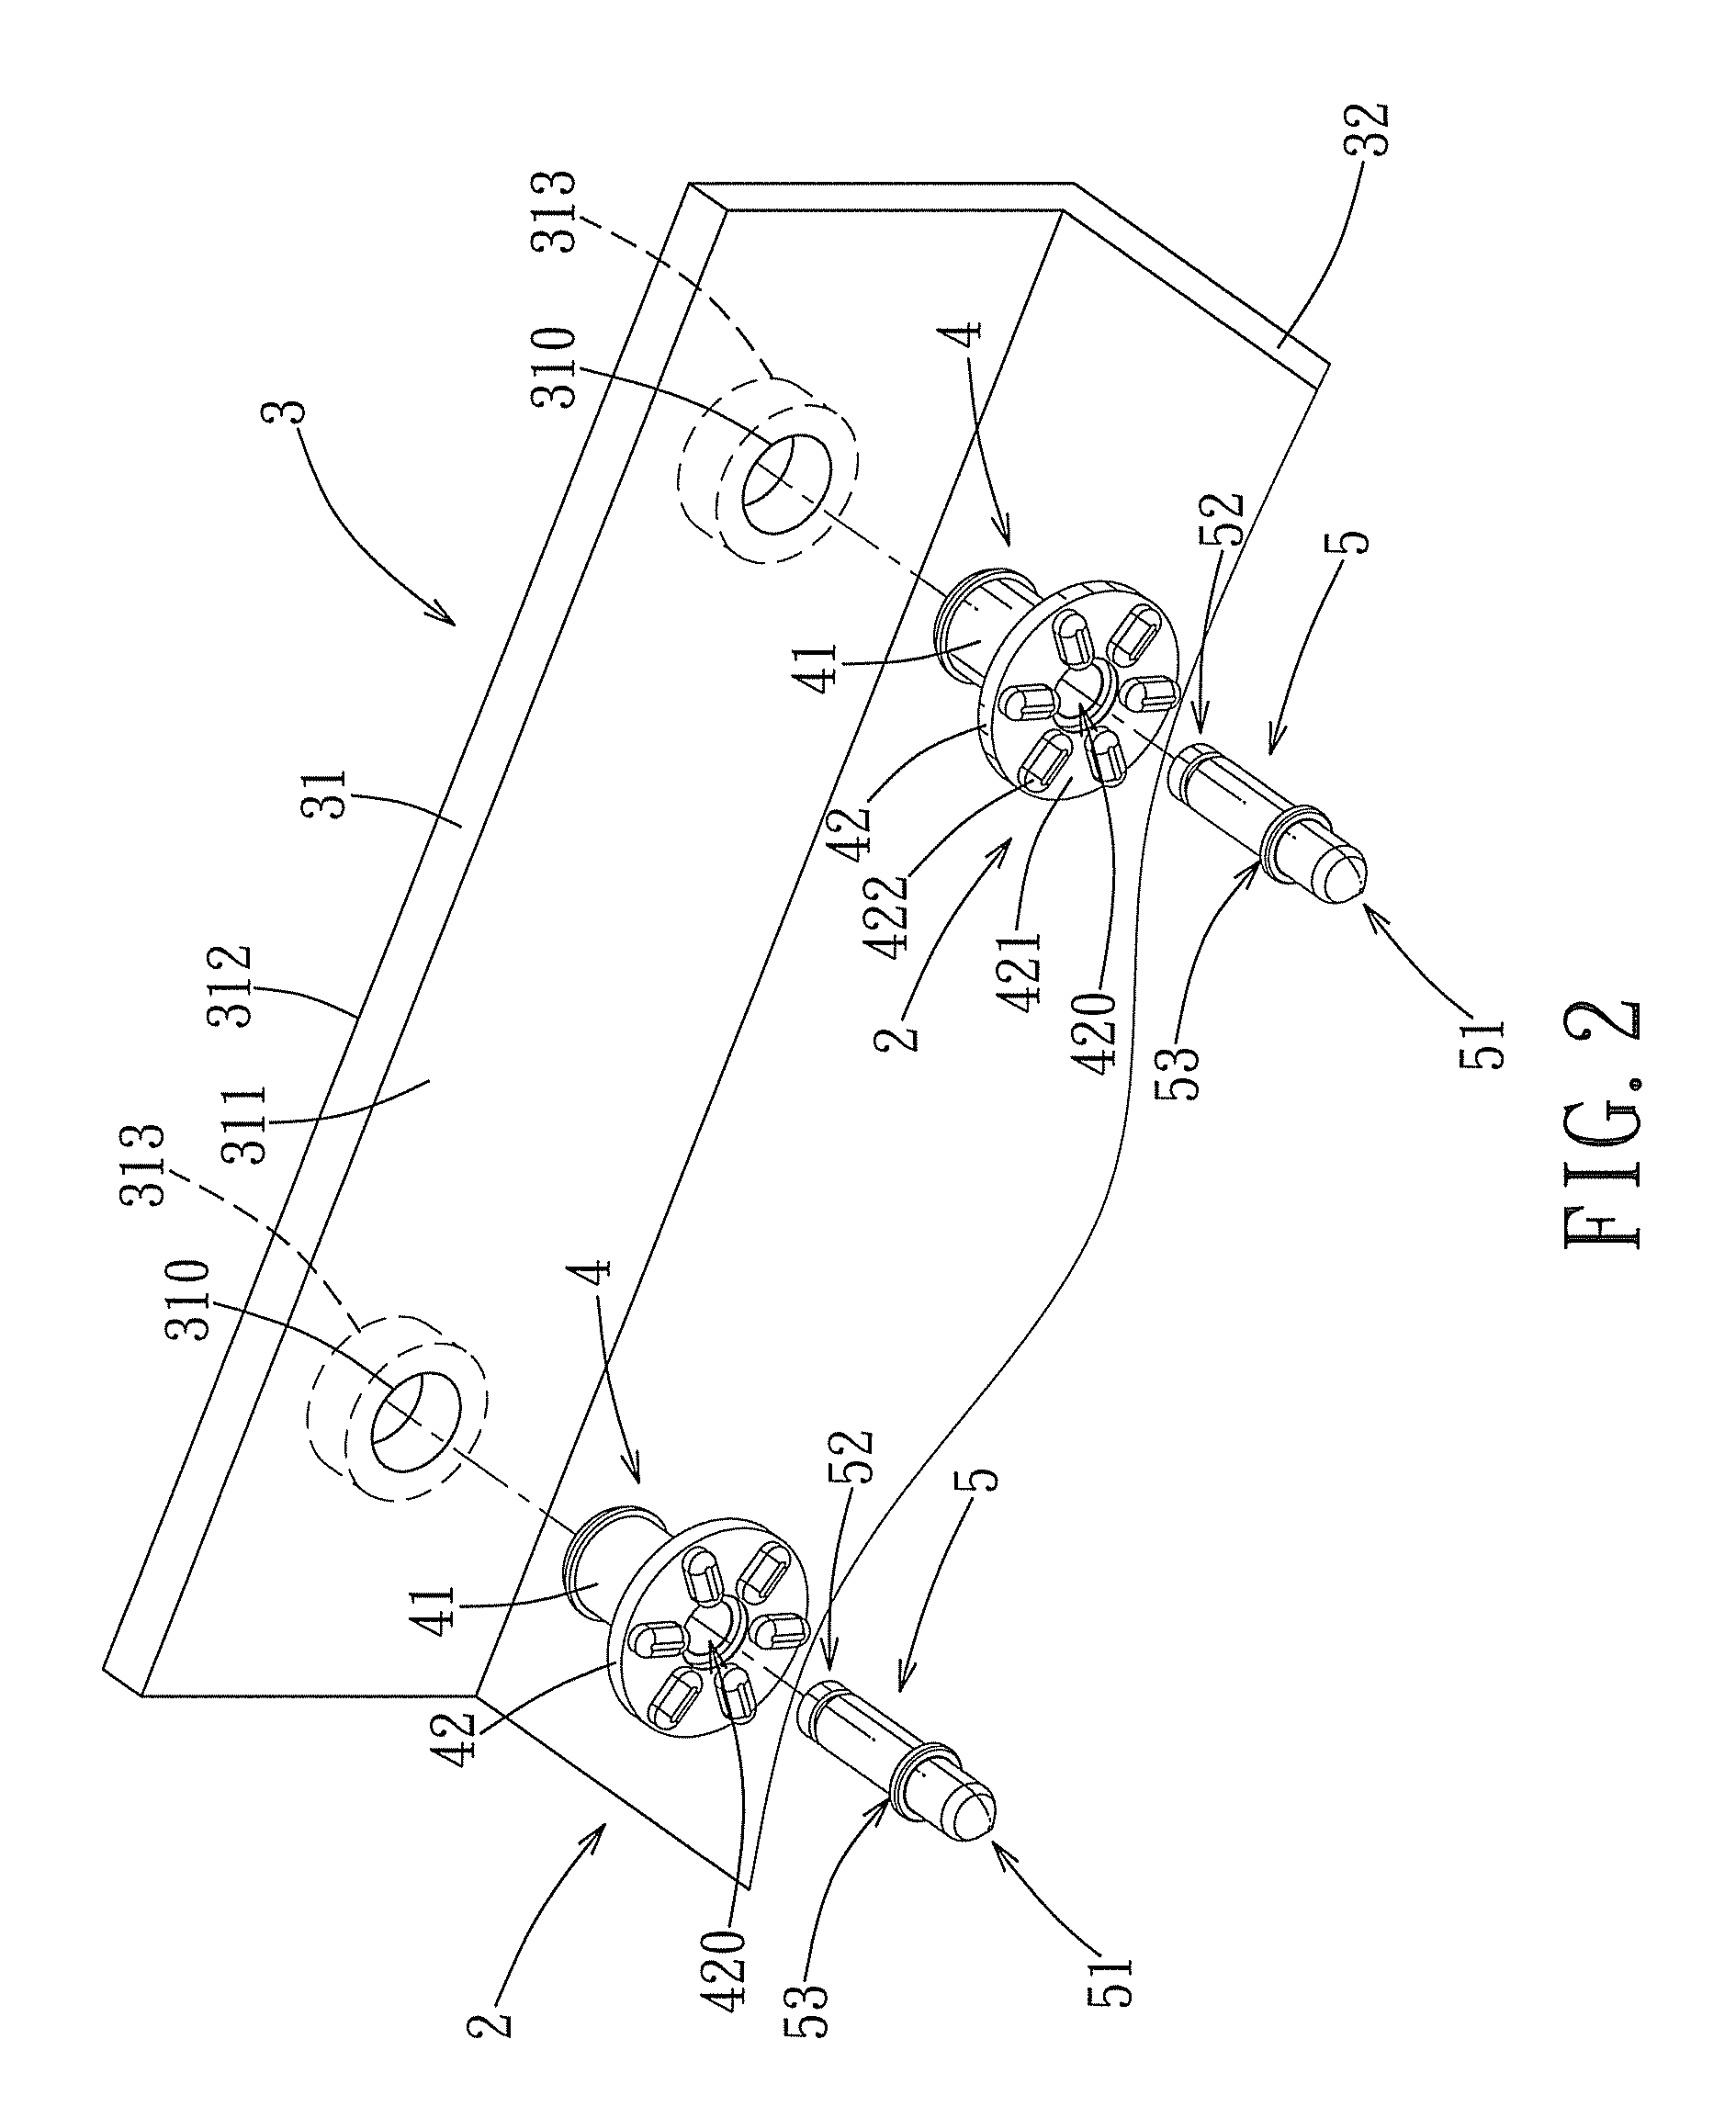 Shockproofing module and assembly of the shockproofing module and an electronic device carrier case